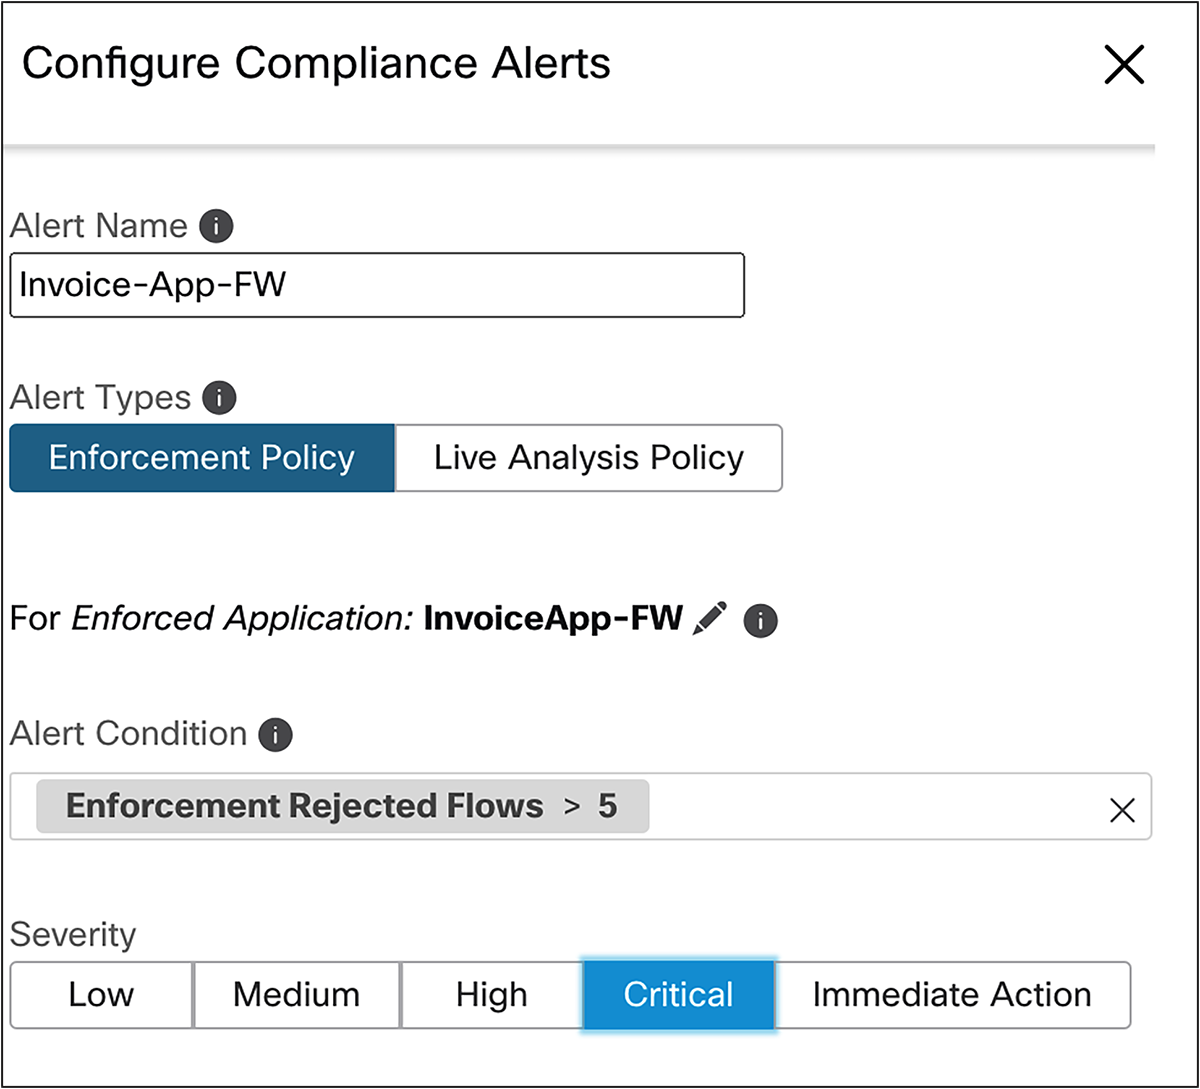 Compliance Alerts for Rejected Flows